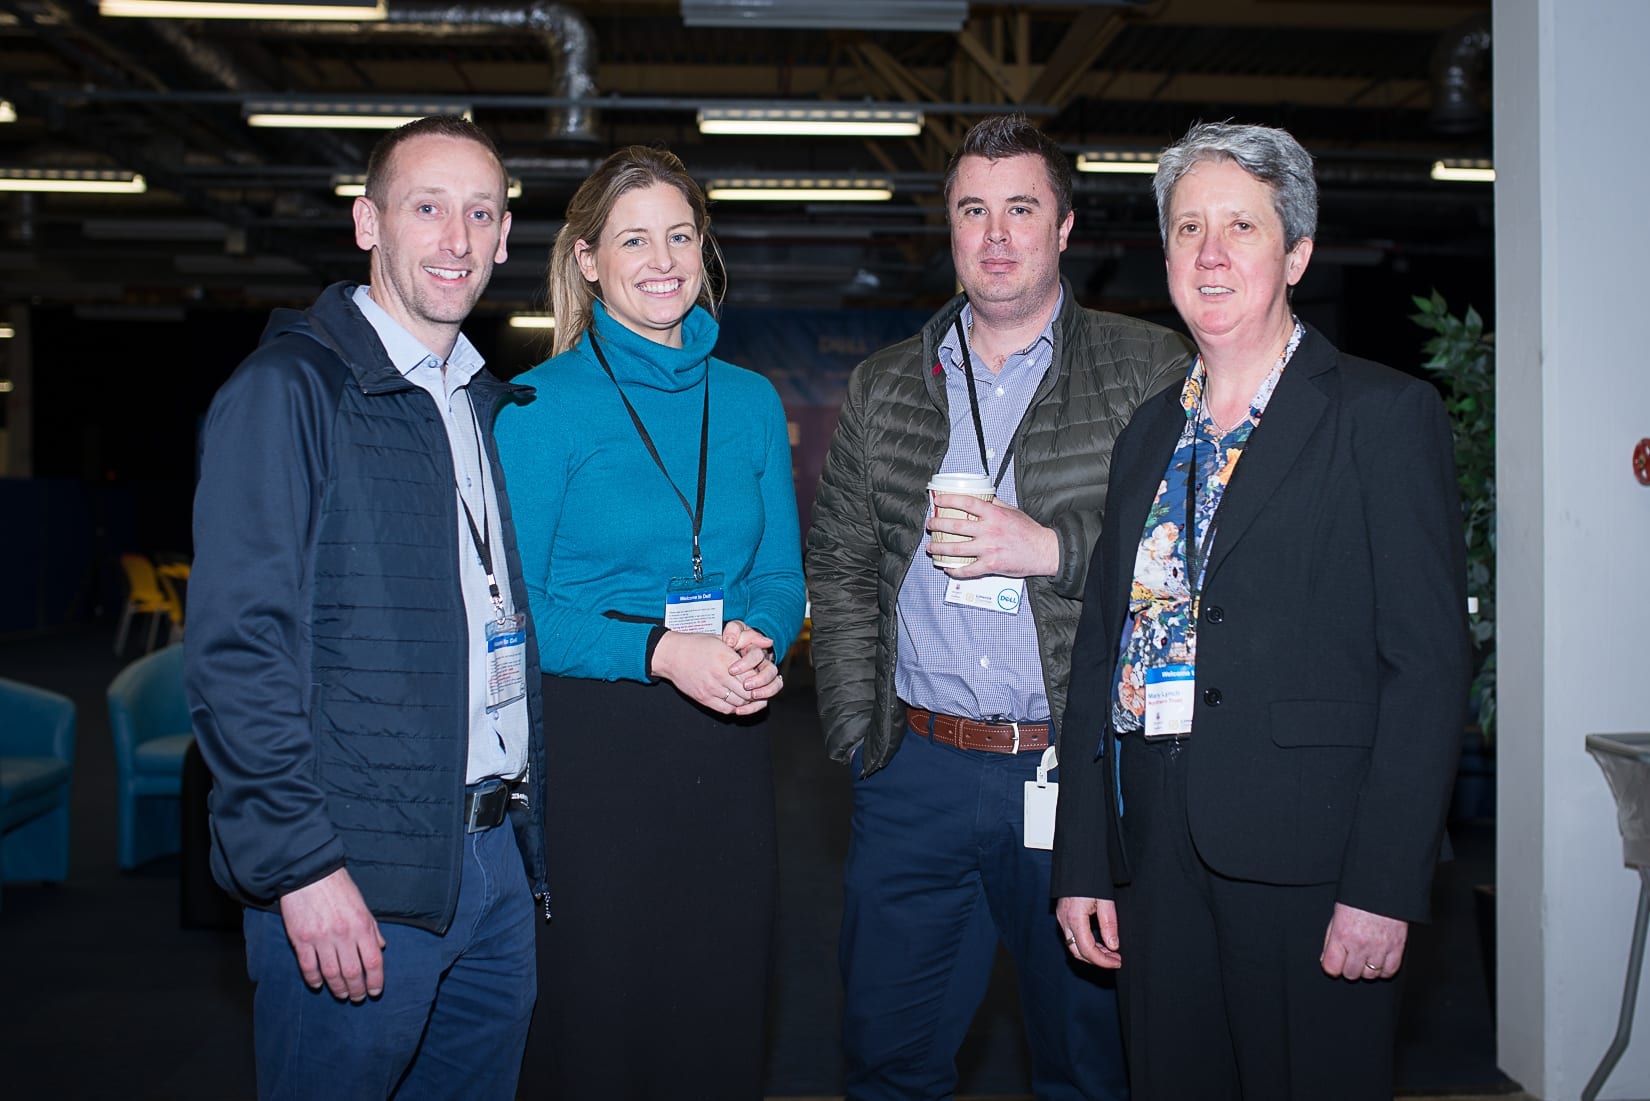 At the Limerick Chamber Regional Leaders programme in Dell, sponsored by Dell EMC, in association with Kemmy Business School UL, was From left to right: Damien McGettigan, Marie Clare Stack, Ronan Hanahran and Mary Lynch all from Northern Trust